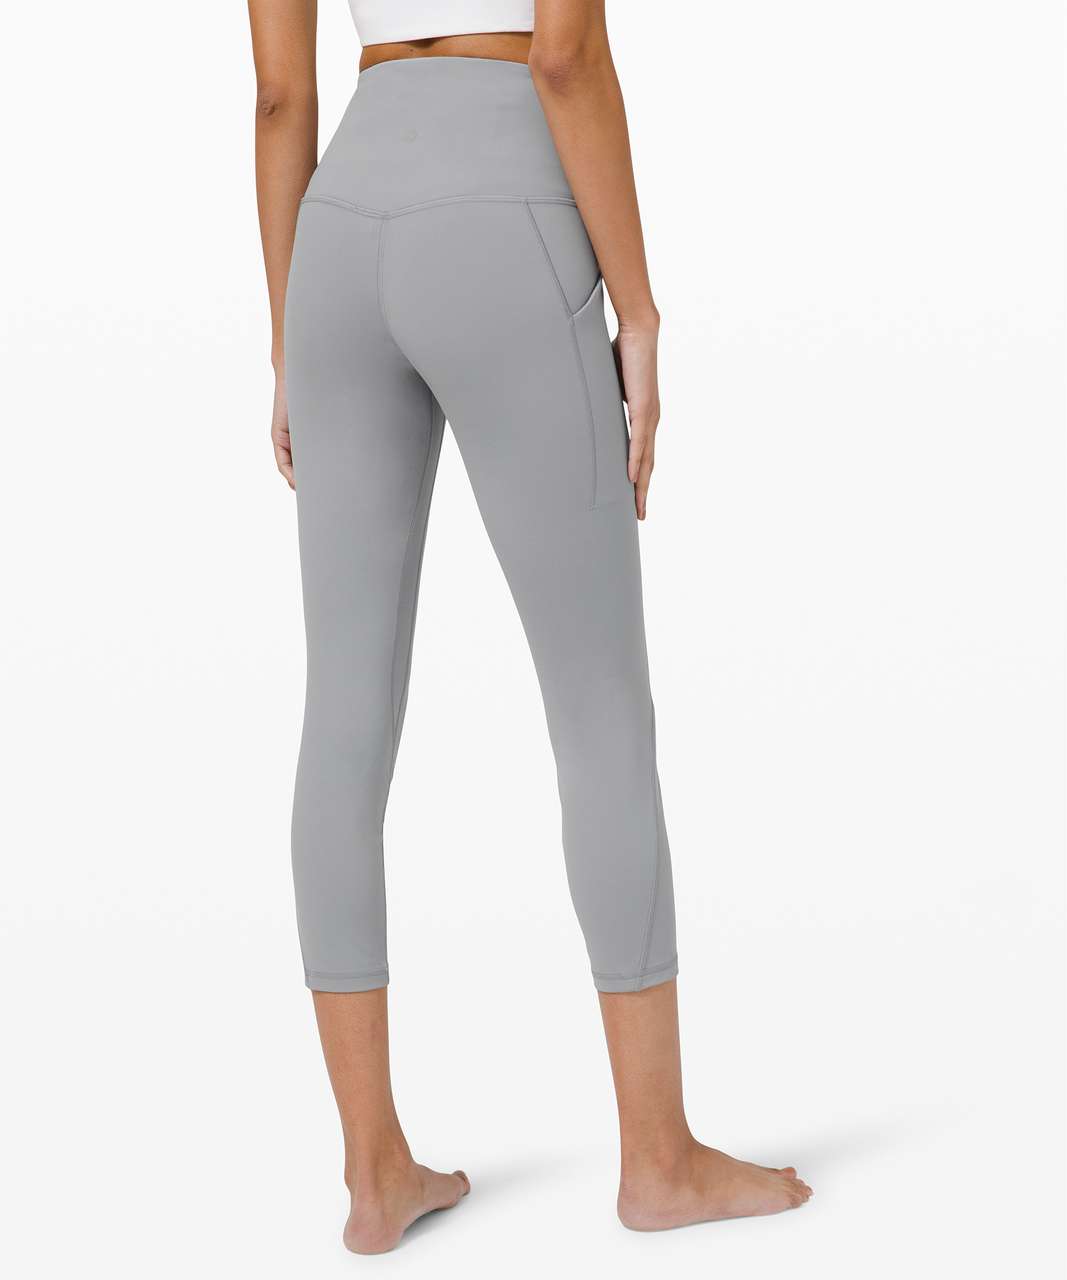 Lululemon Align Pant 25” with Pockets Size 2 in Rhino Grey, Women's  Fashion, Activewear on Carousell